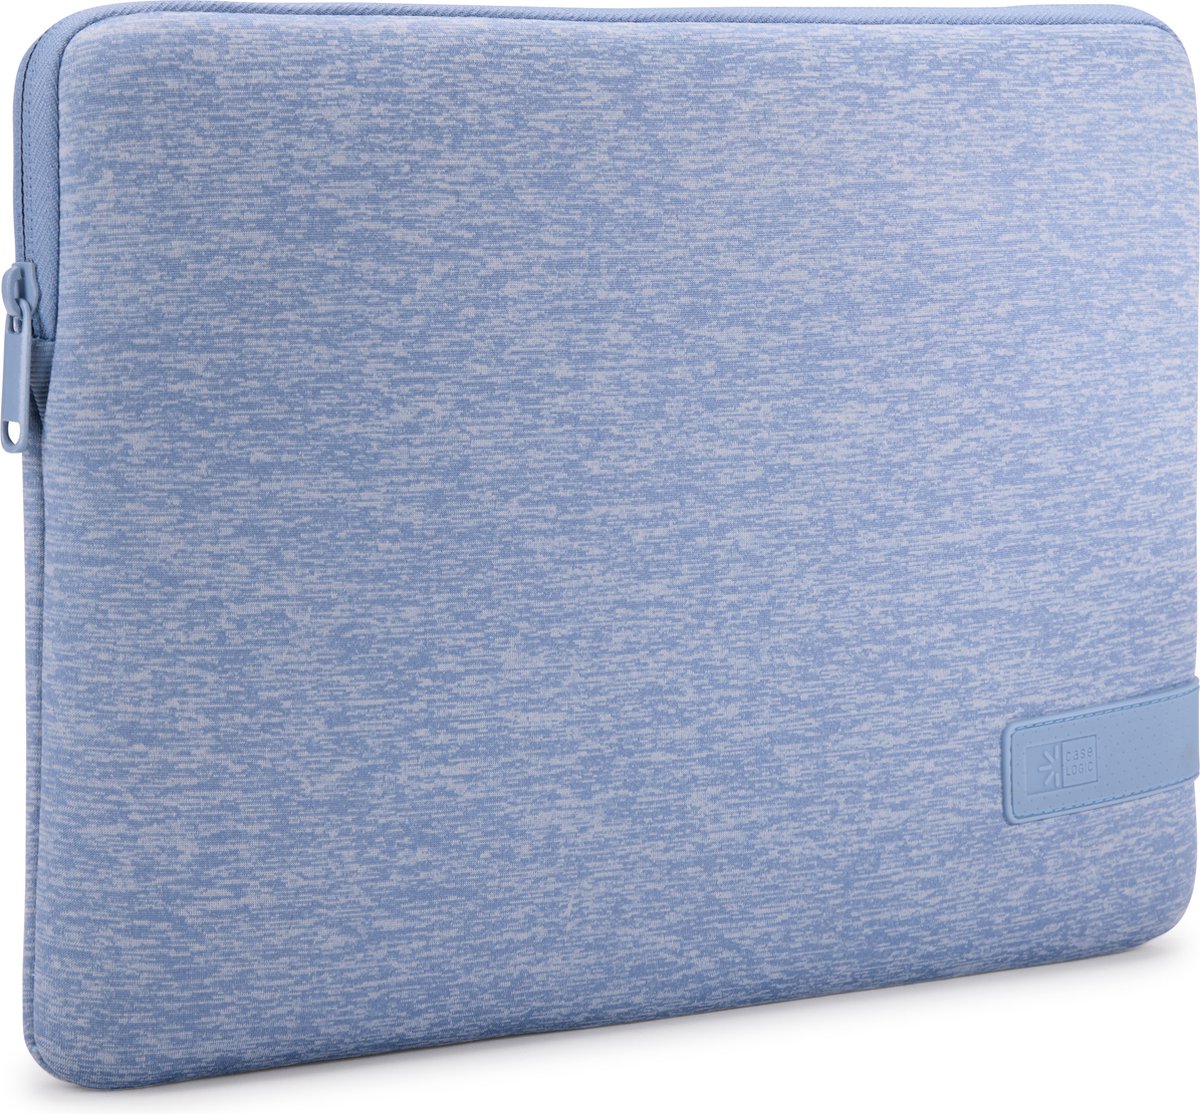 Case Logic Reflect - Laptophoes/ Sleeve - MacBook - 14 inch - Skyswell Blue